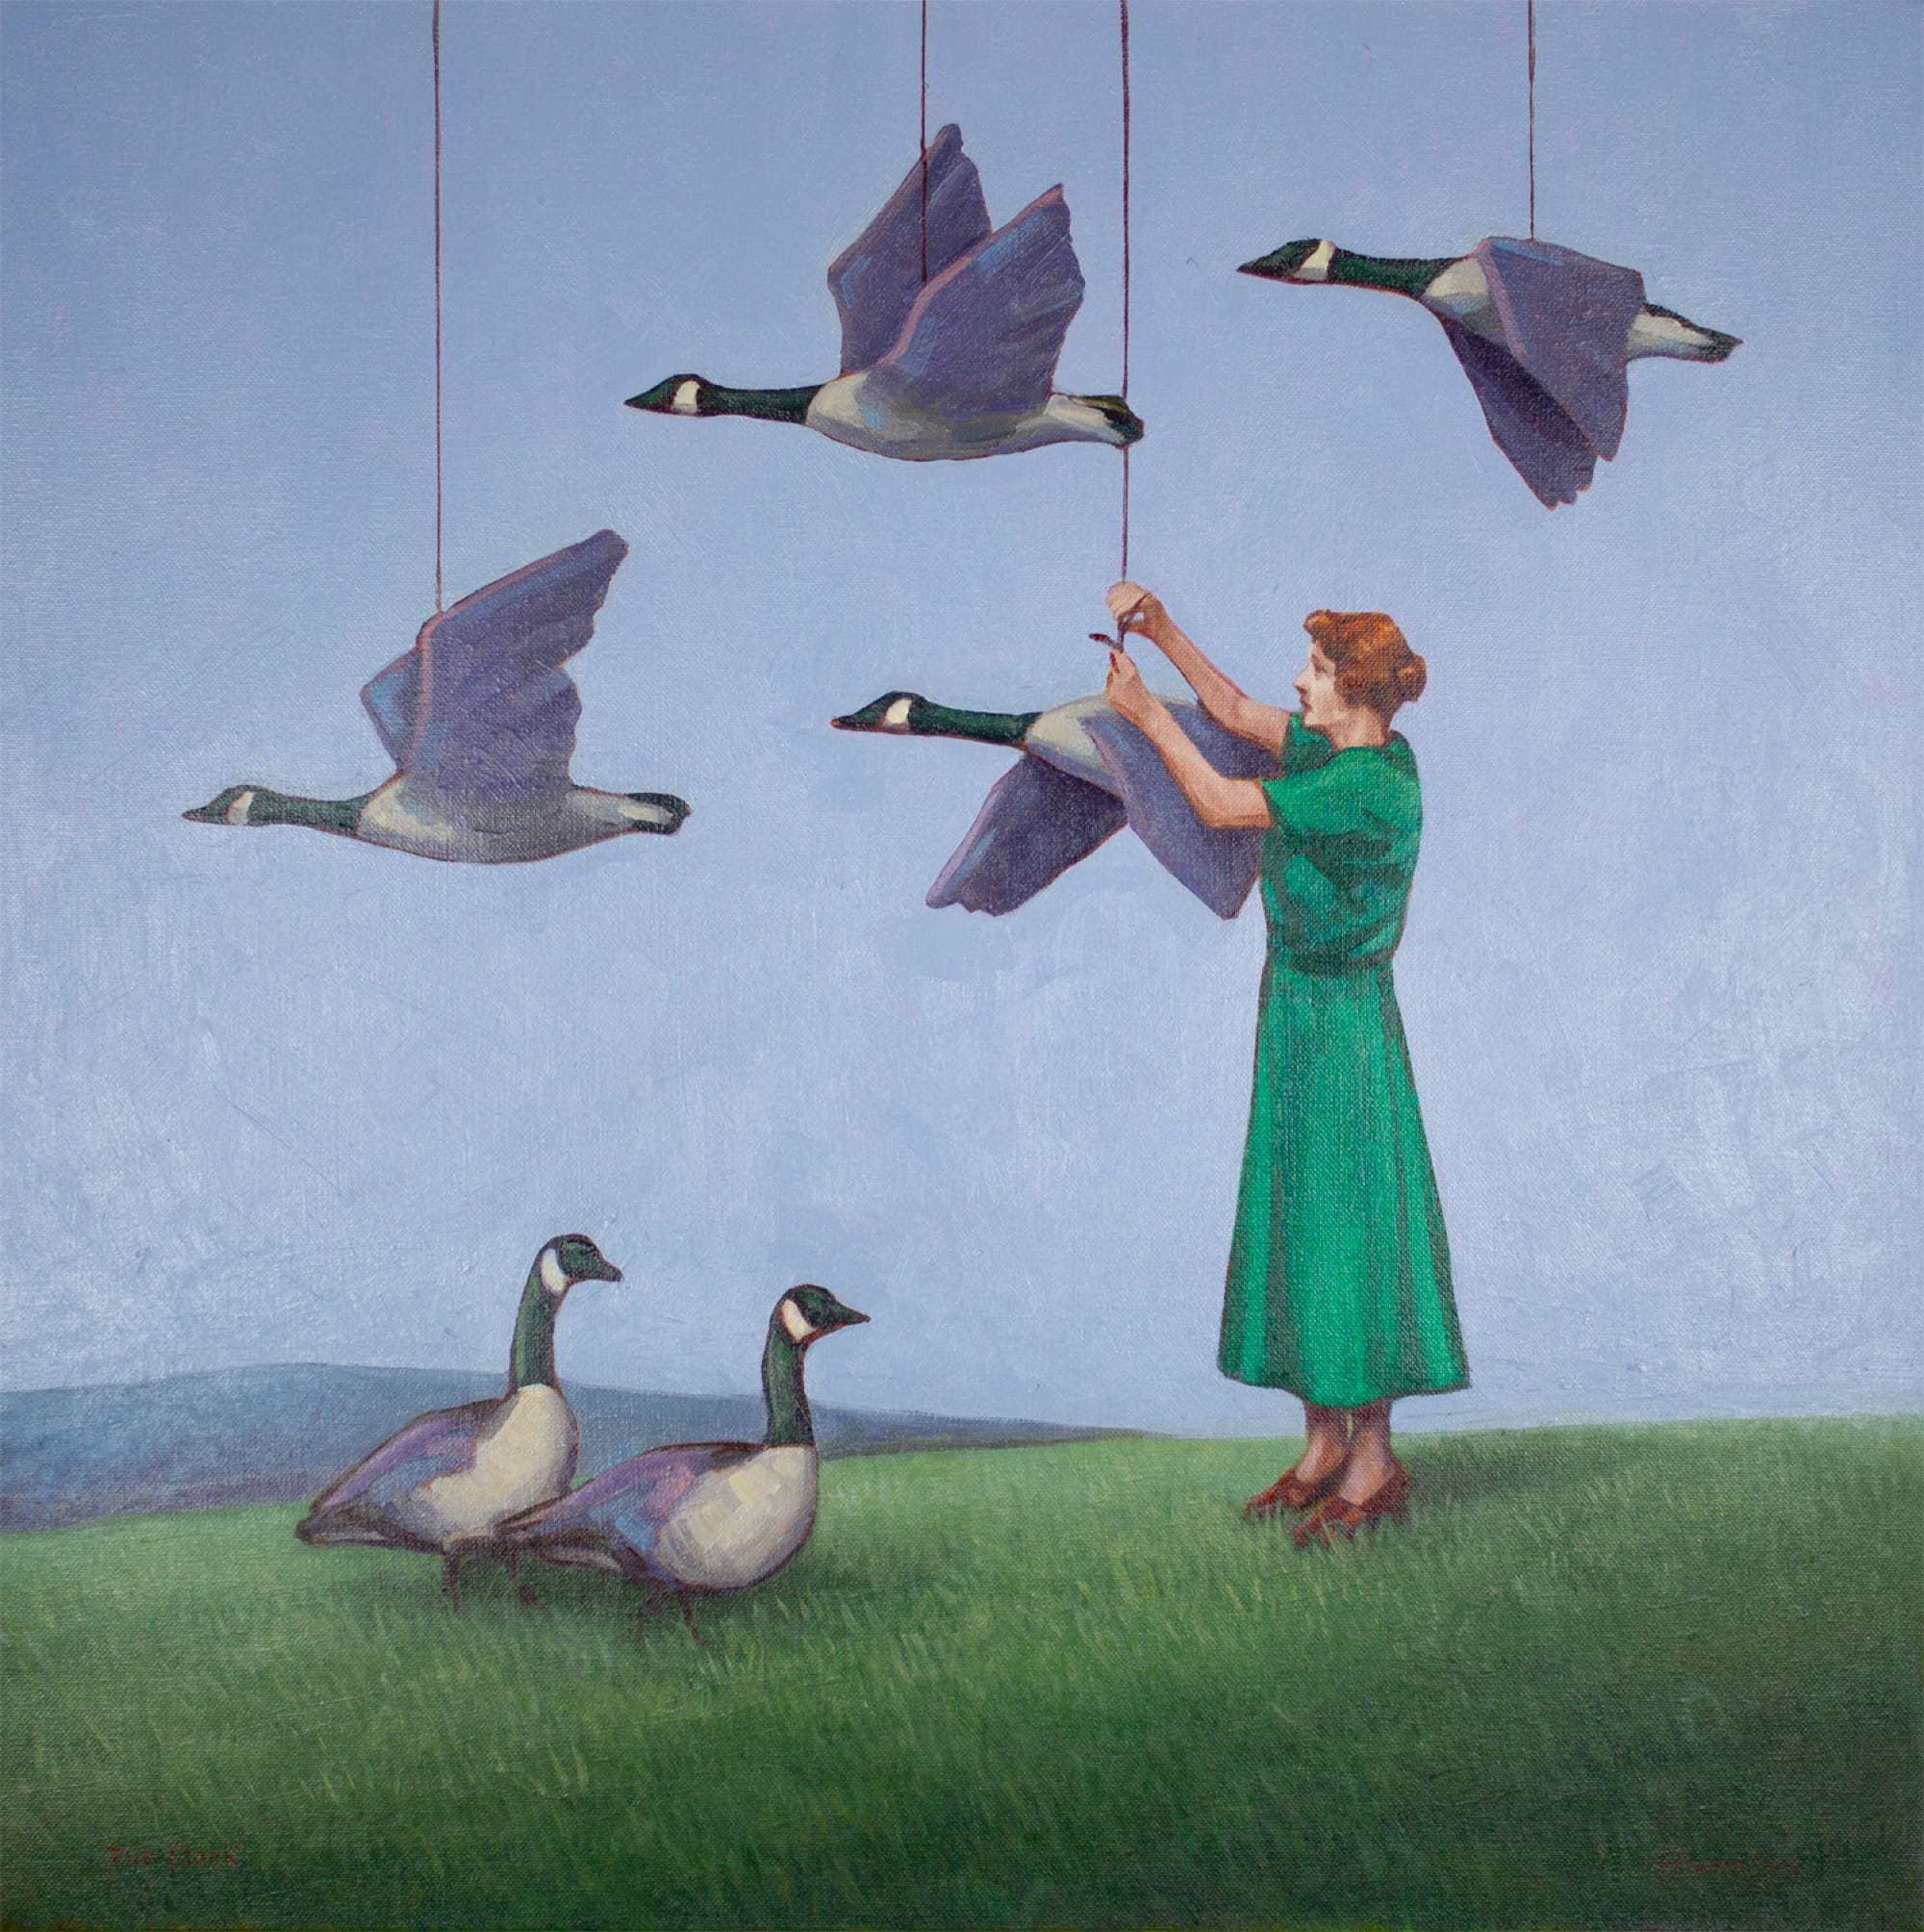 a woman in a green dress hangs geese from strings suspended from the sky